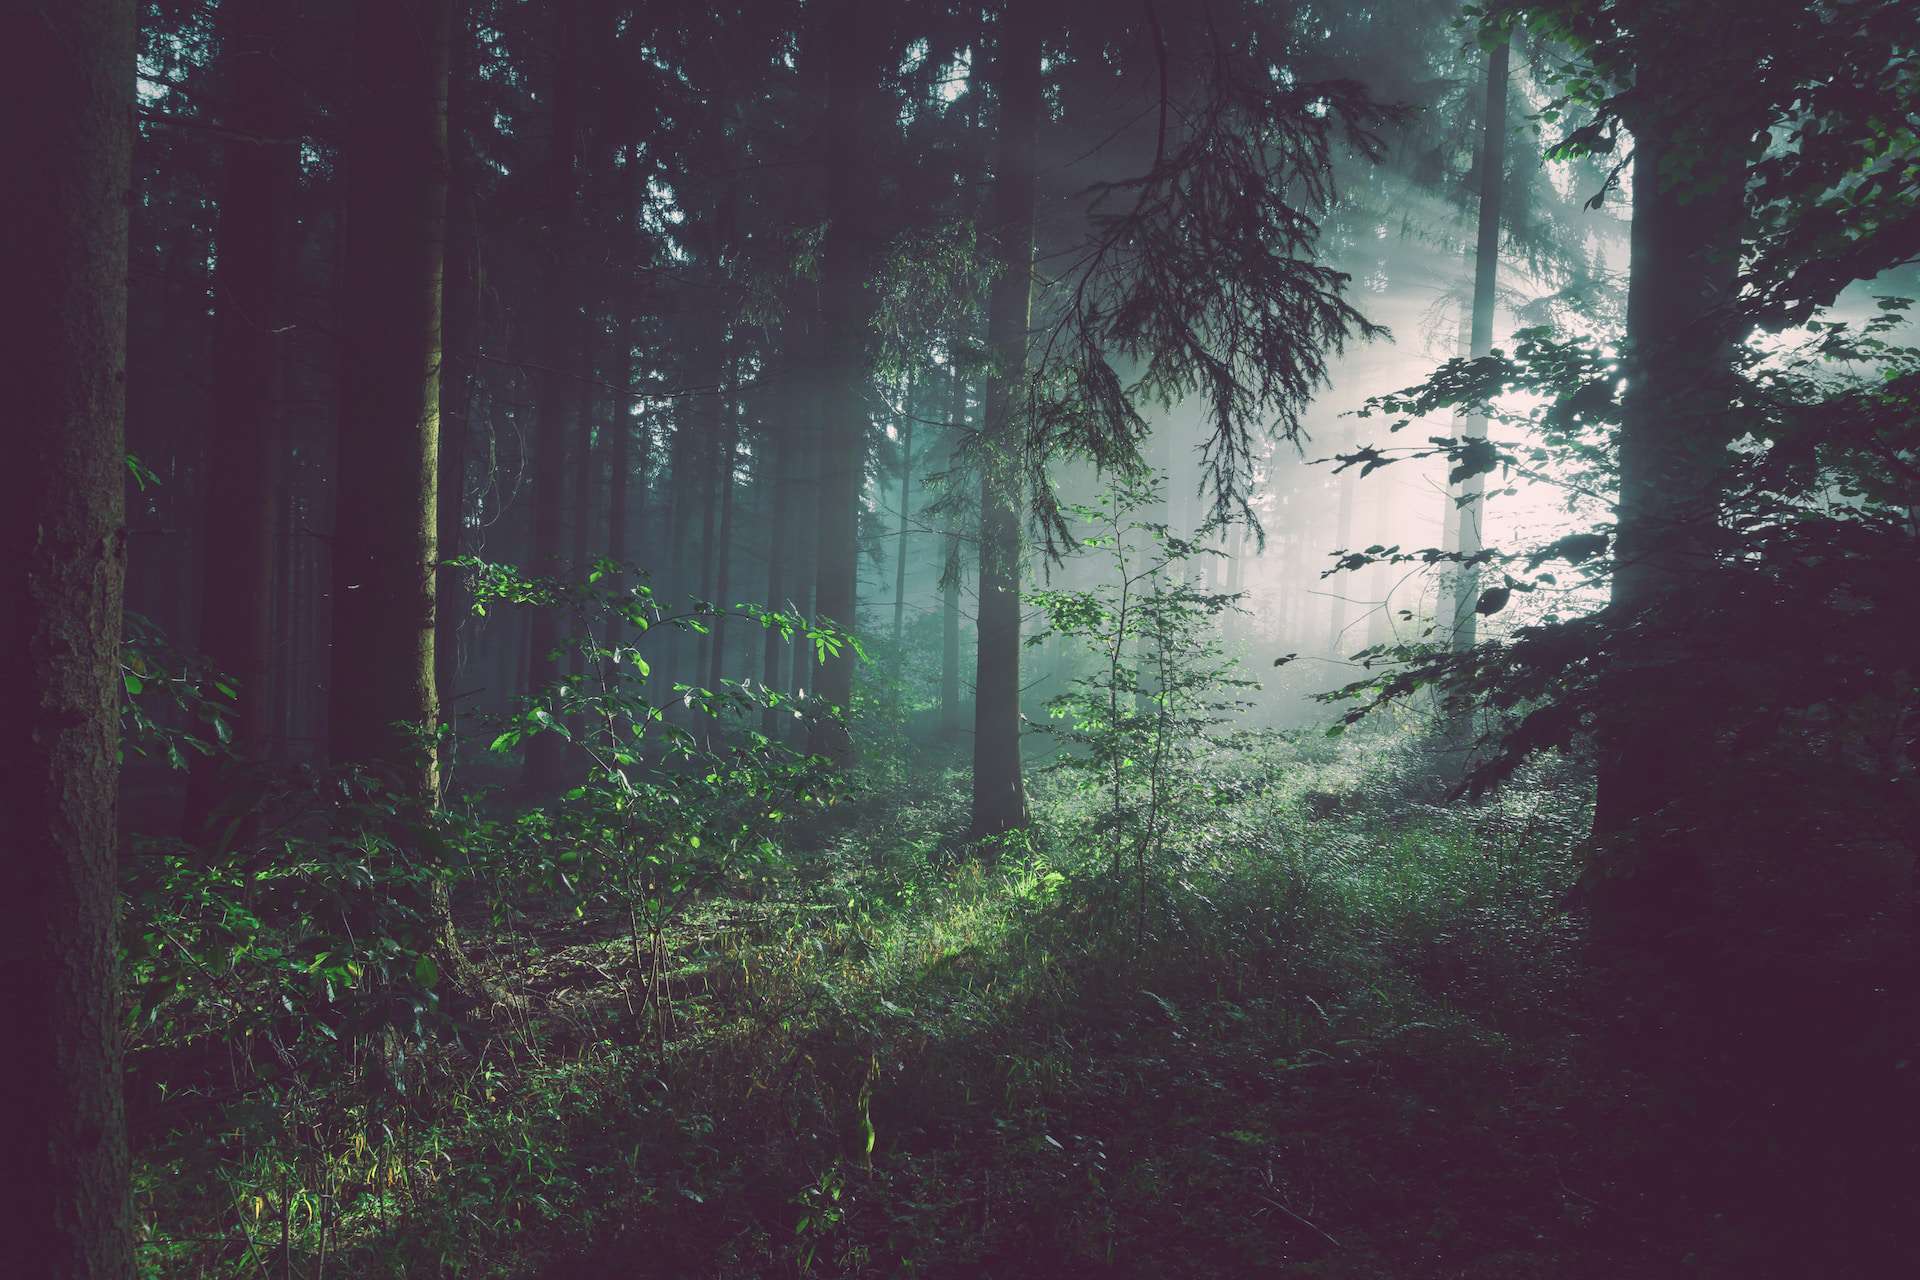 This photo shows light shining through a forest and represents the topic of this blog ThemeForest. It is in colour, but the majority of the photo is in darkness